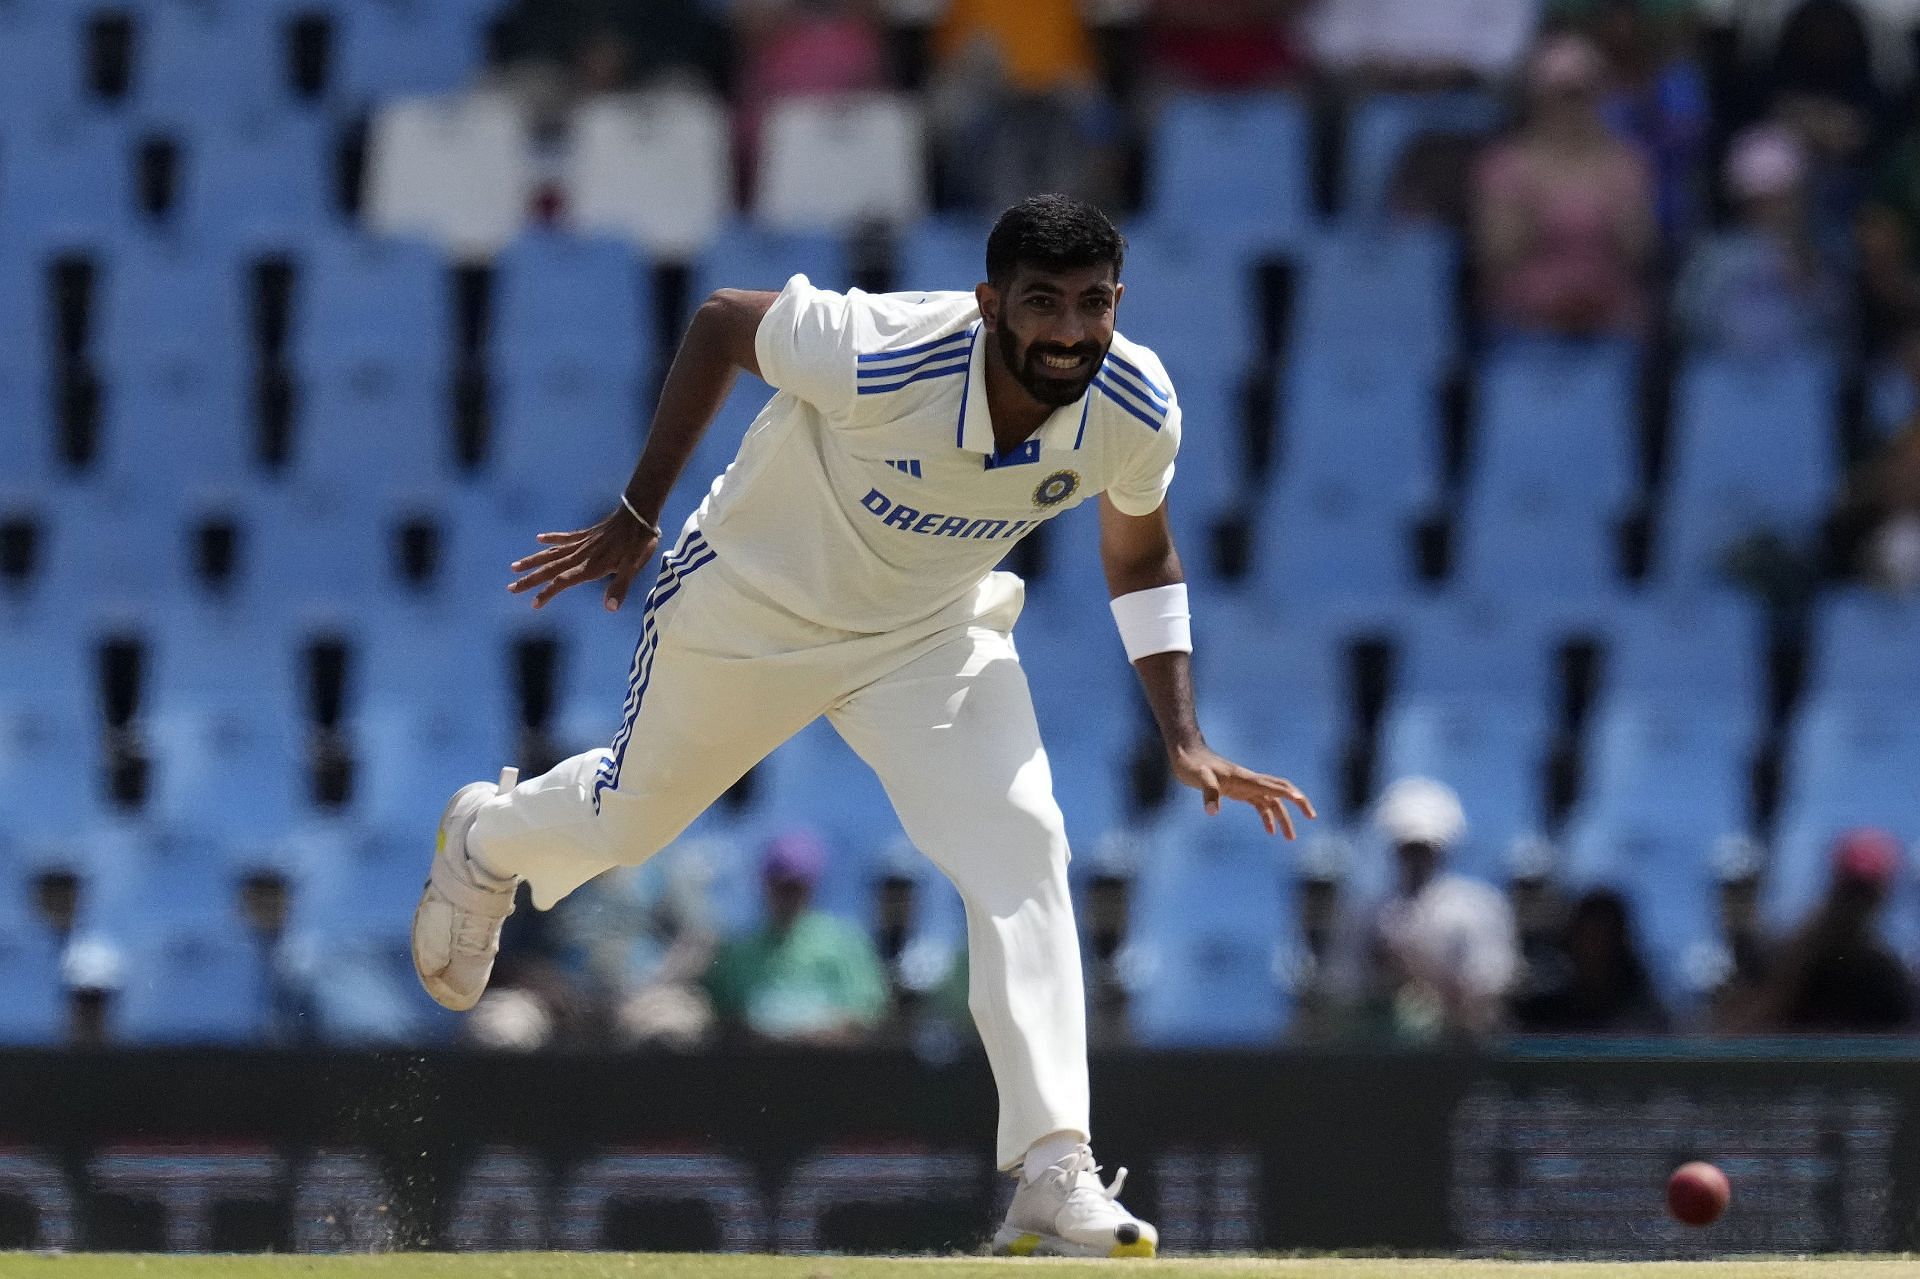 Jasprit Bumrah was the pick of the Indian bowlers once again